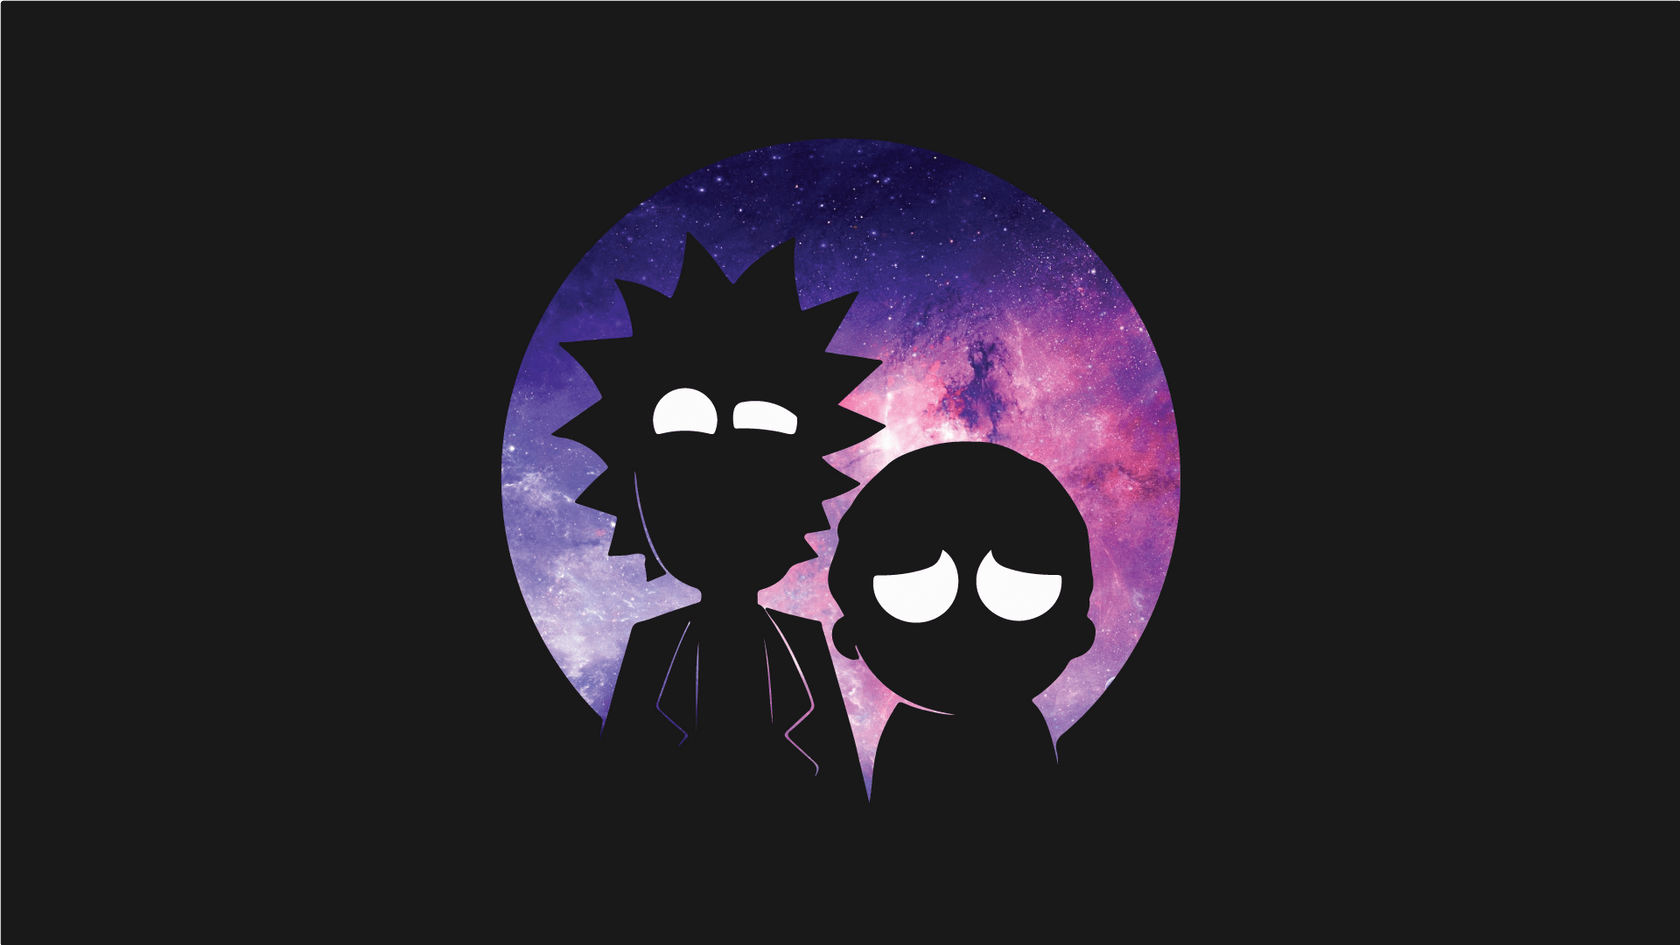 Rick and Morty Desktop Wallpapers - Top Free Rick and ...